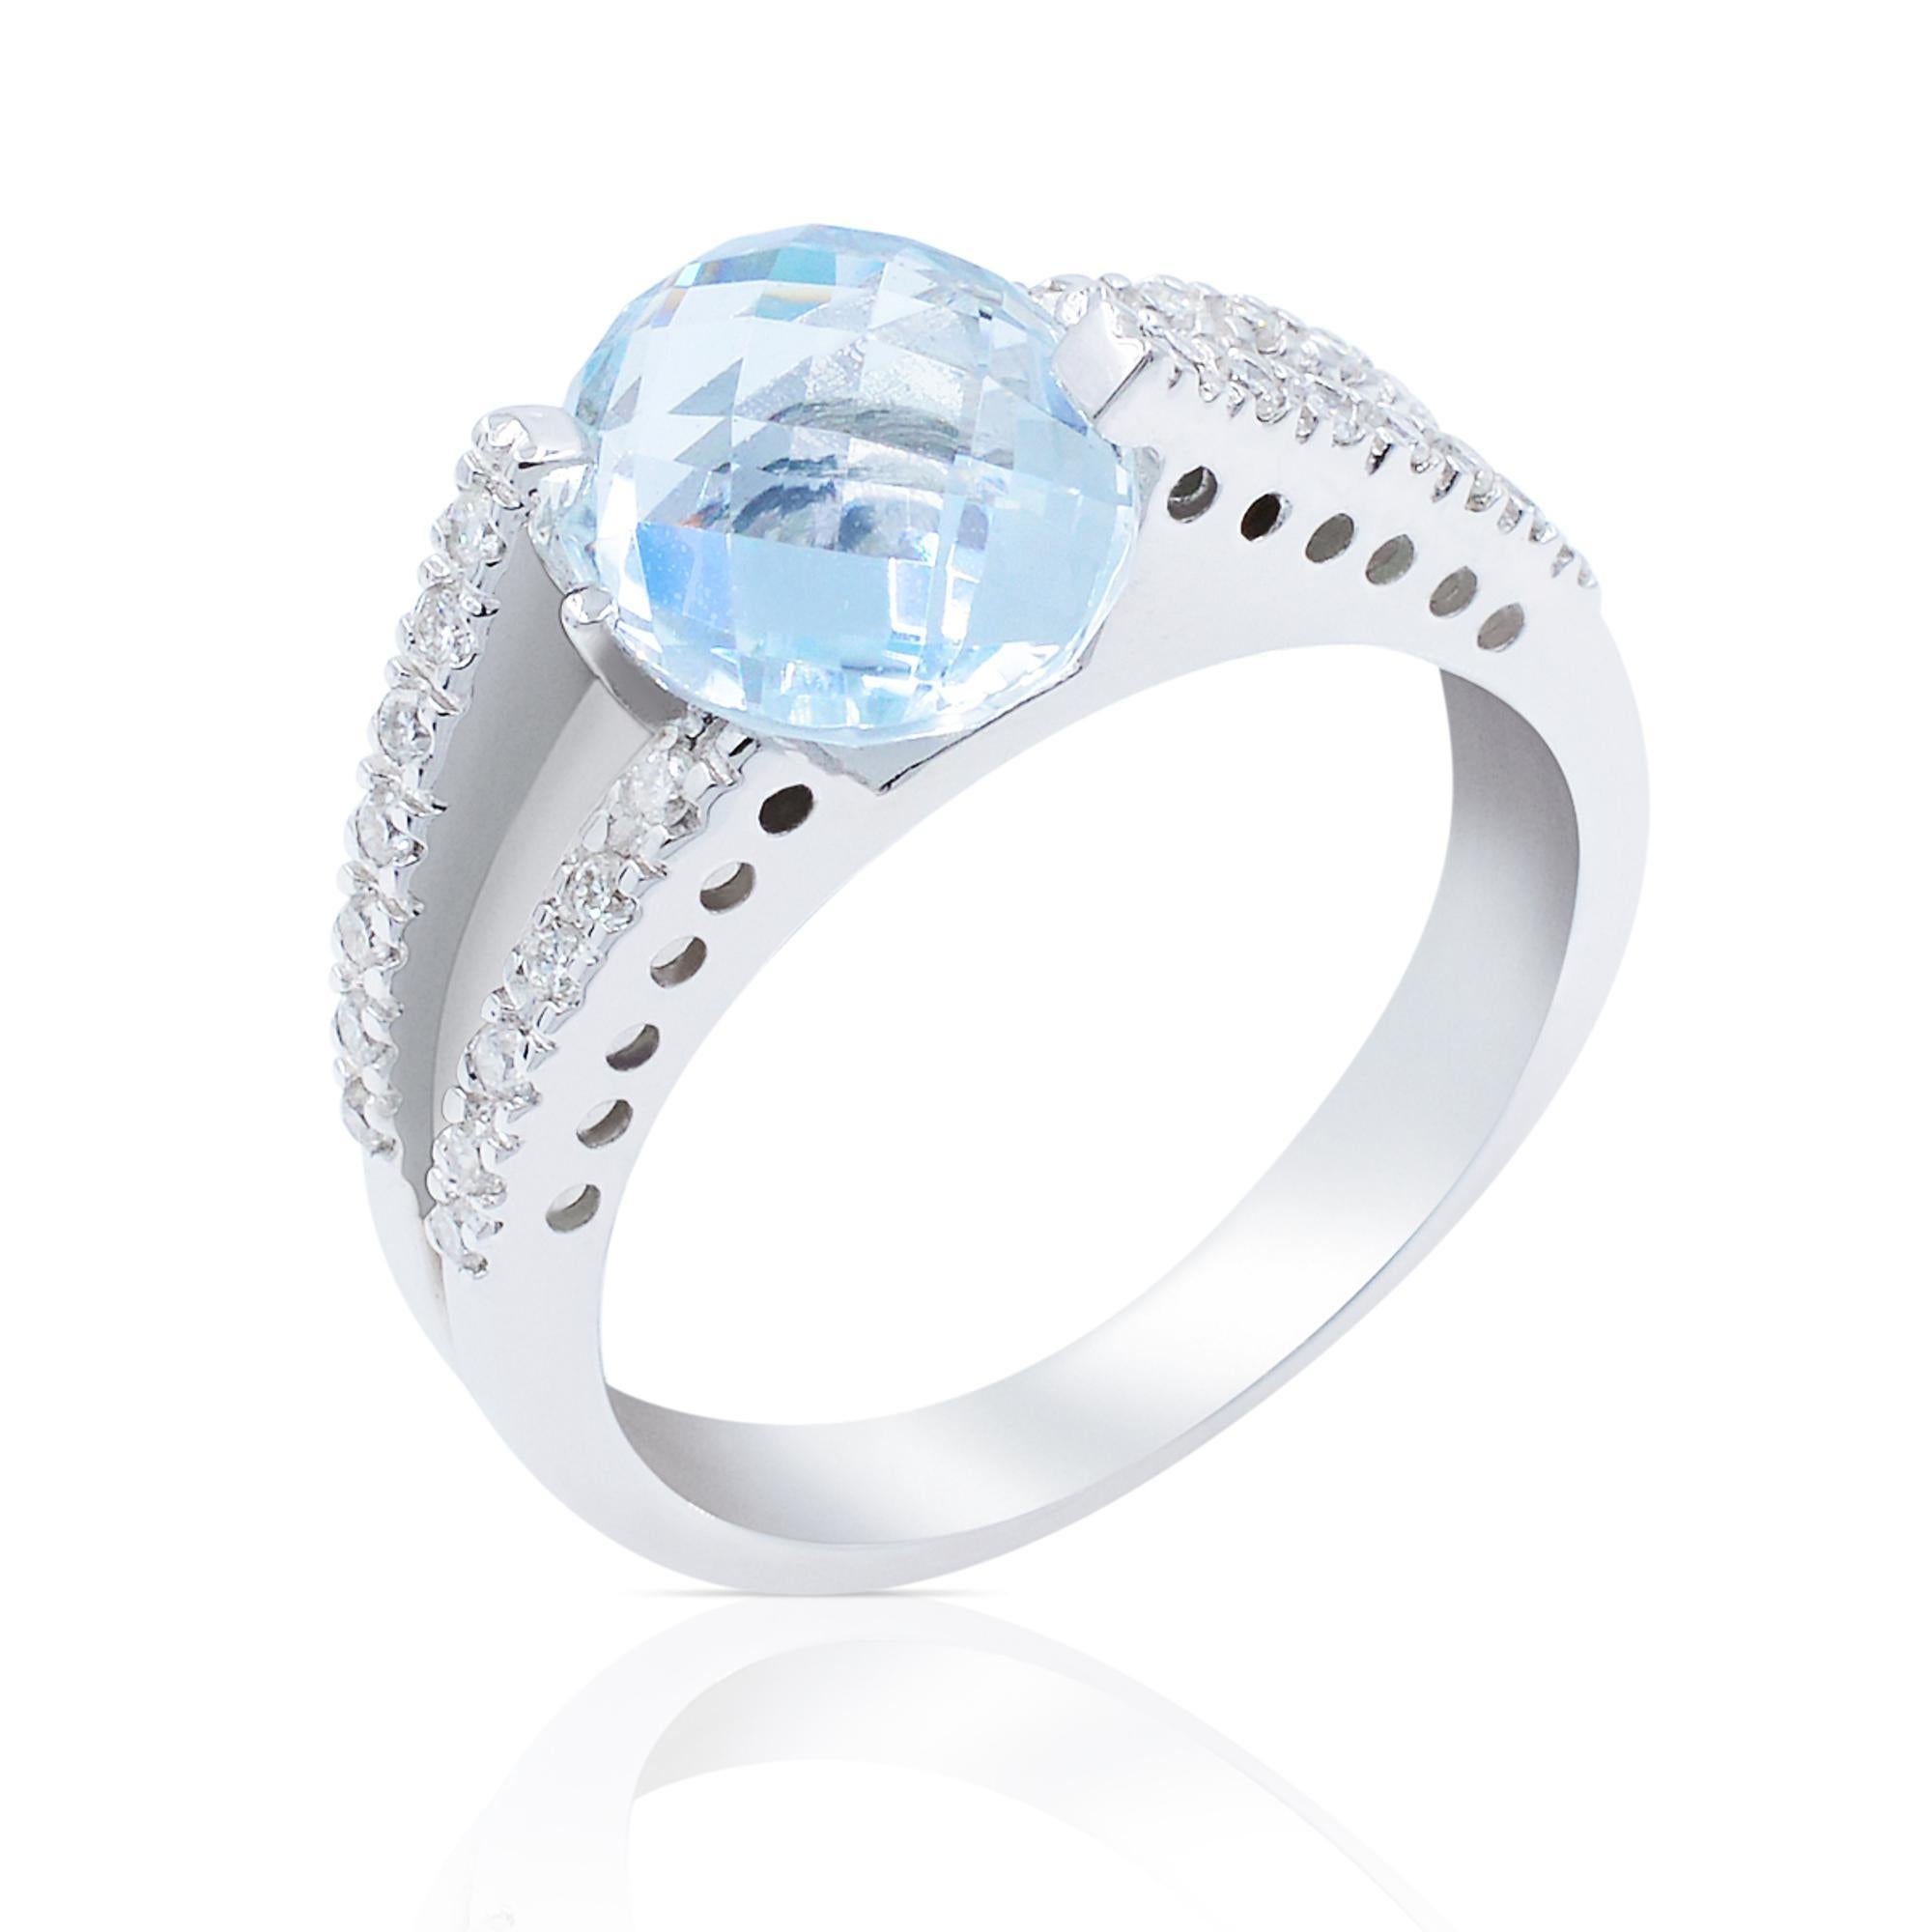 Elegant checkerboard aquamarine ladies ring featuring an oval cut aquamarine as center stone along with the two slips setting with a total of 27 diamonds weighing 0.21 cttw. Diamond quality: G color and VVS clarity. Crafted in high polished 18K